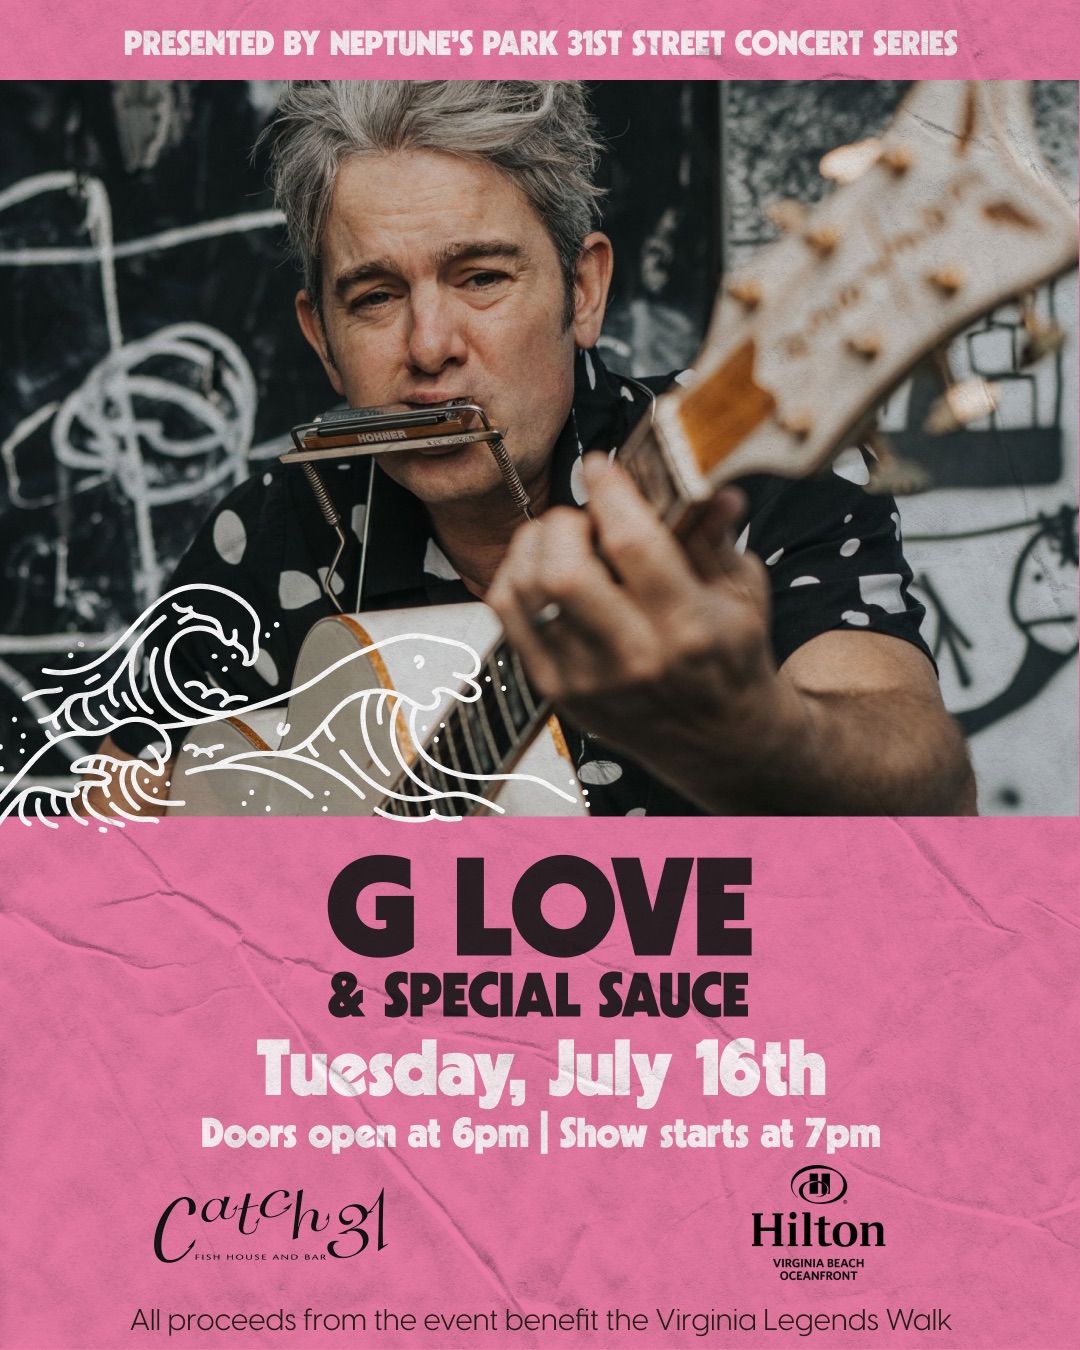 G Love & Special Sauce featuring Mihali Concert | Neptune\u2019s Park on 31st Street